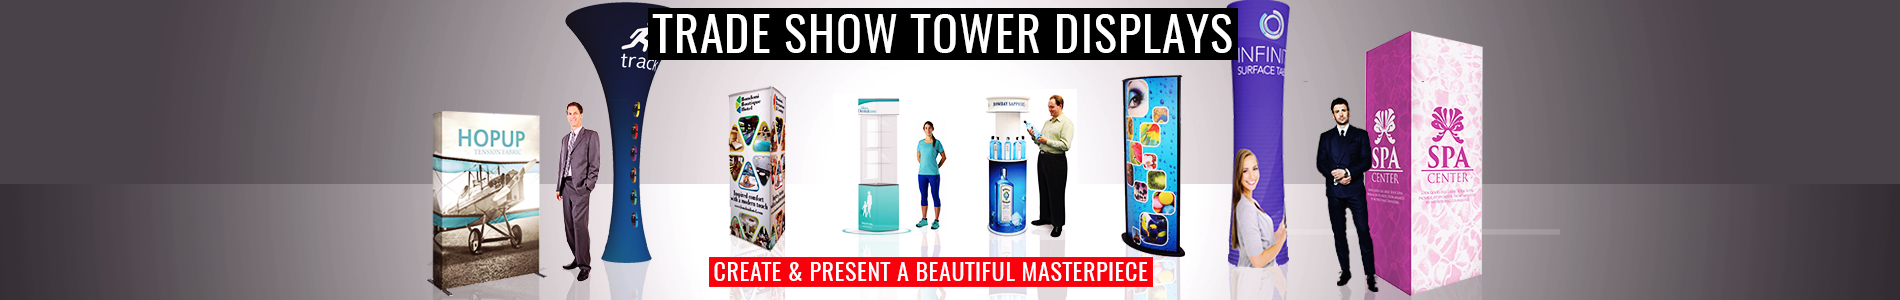 Trade Show Tower Displays